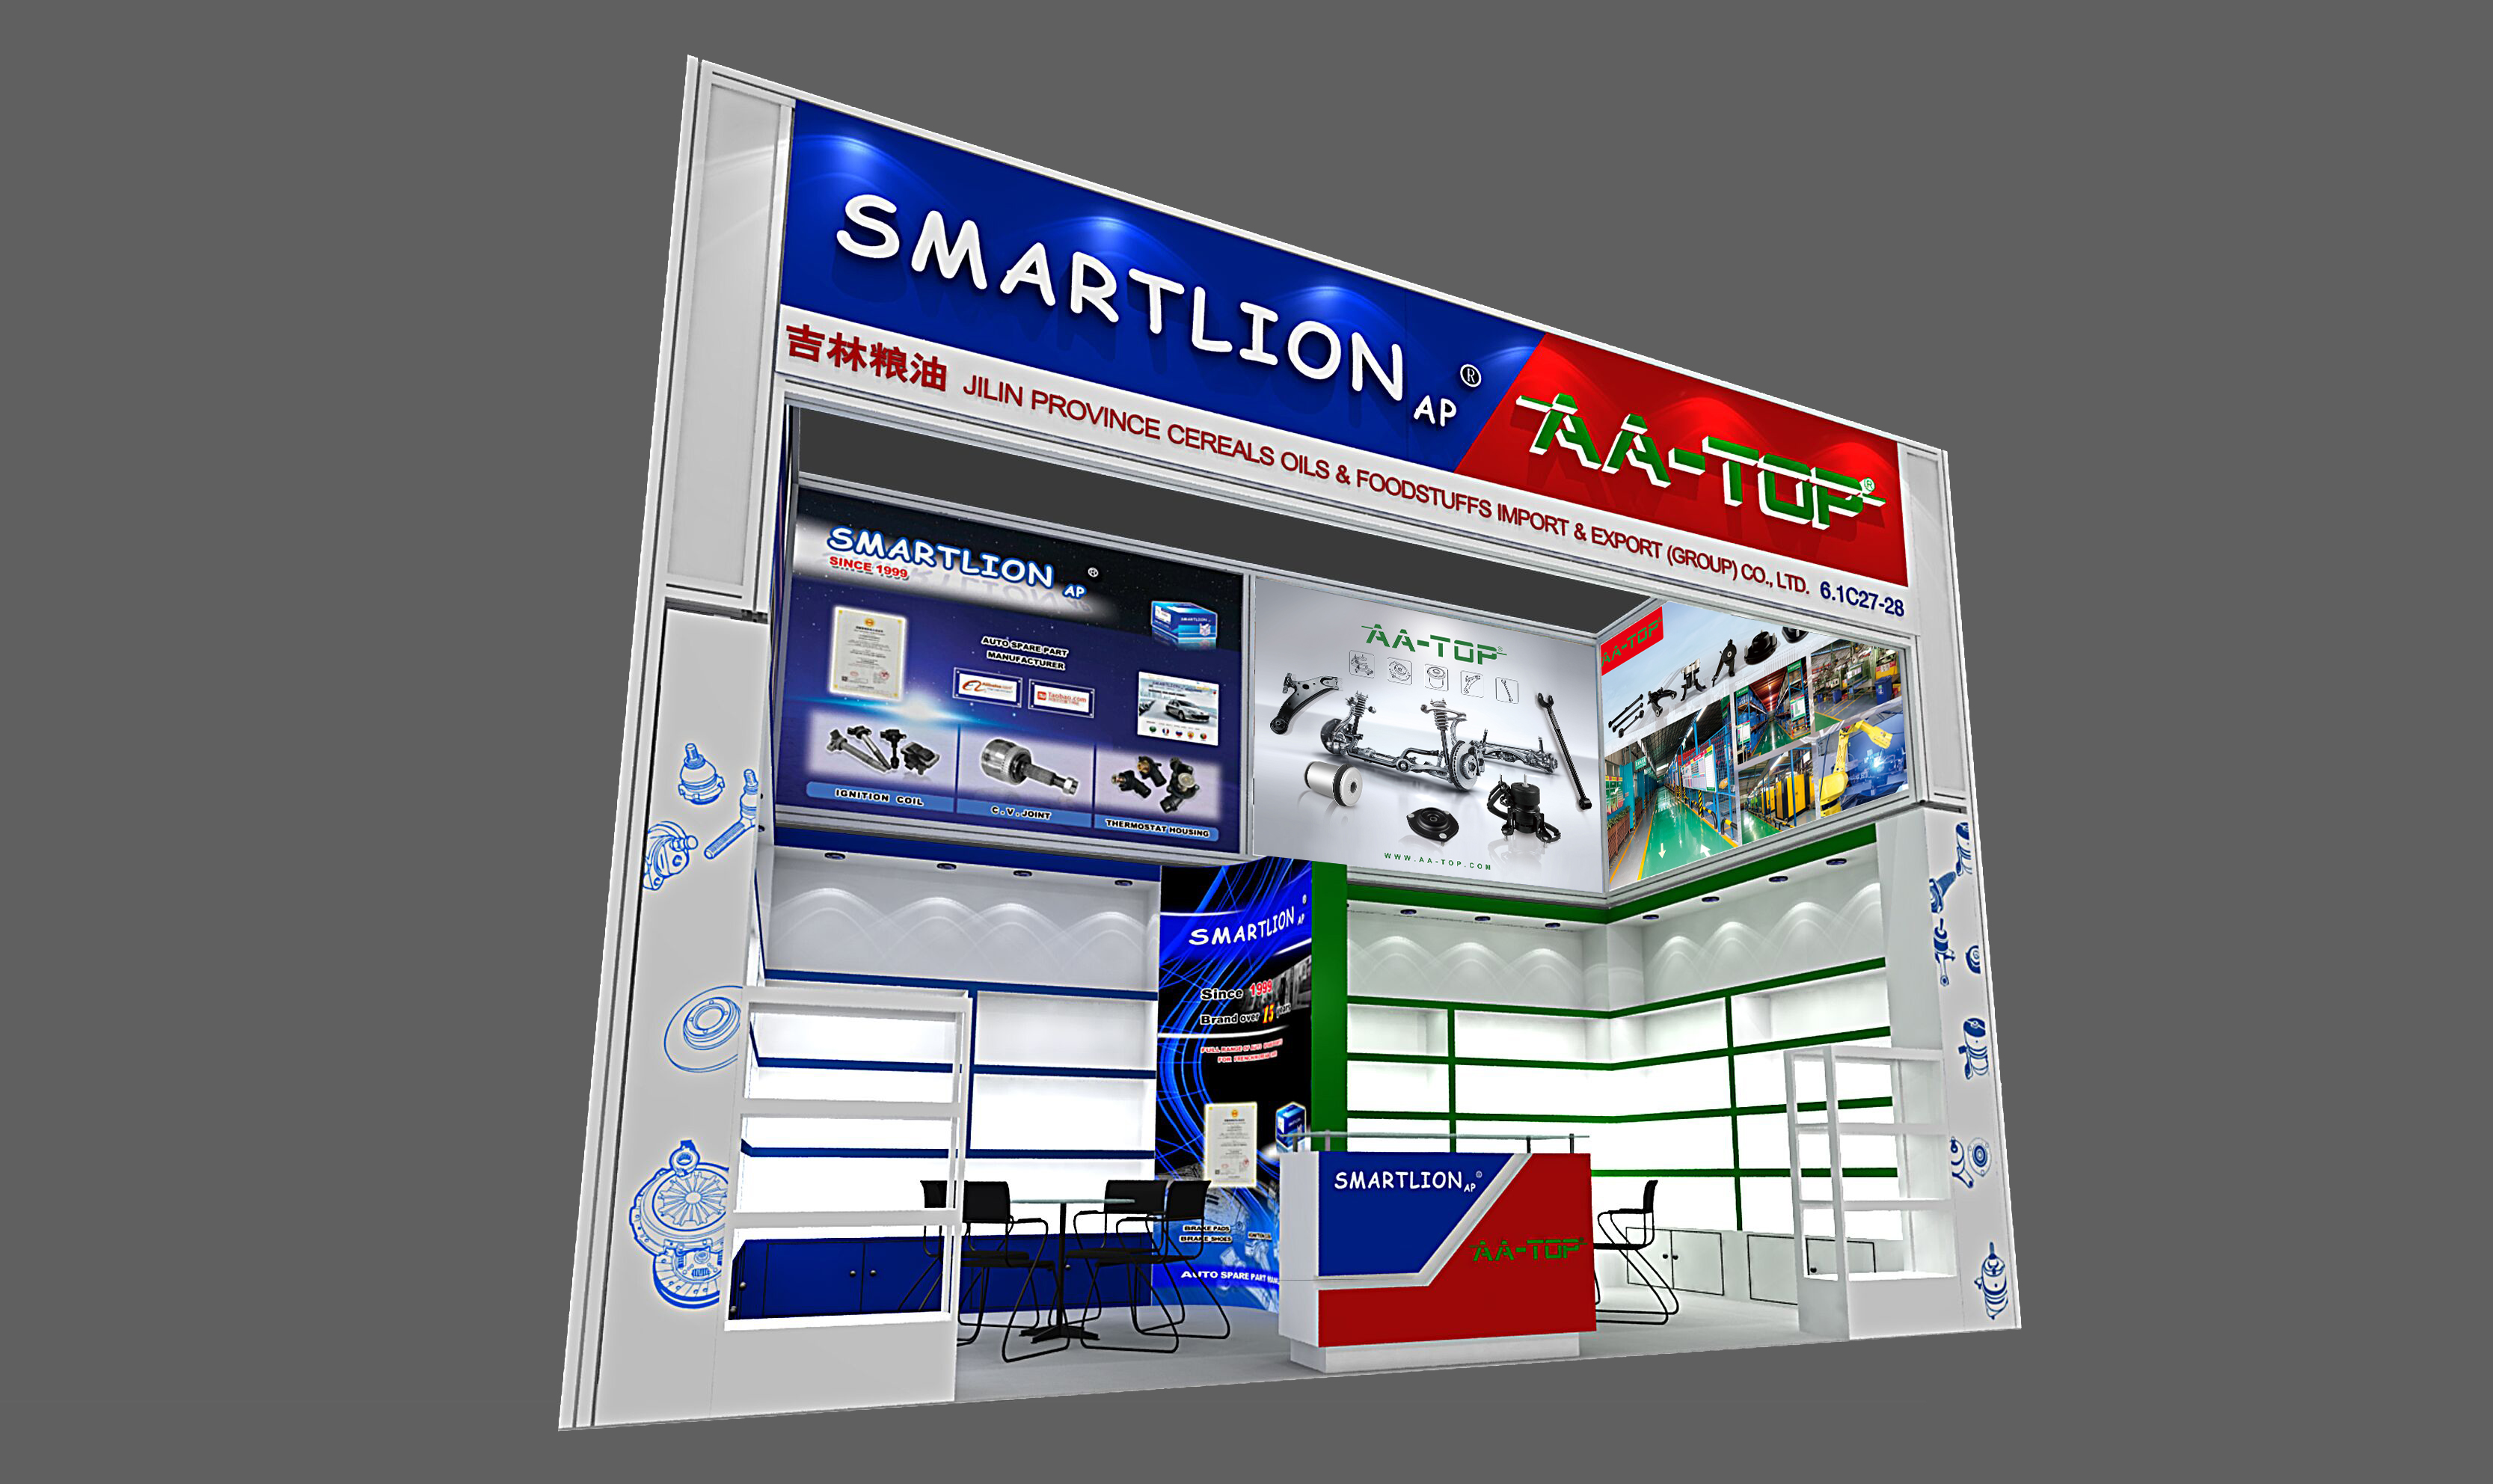 126TH CANTON FAIR WELCOME TO VISIT US ！